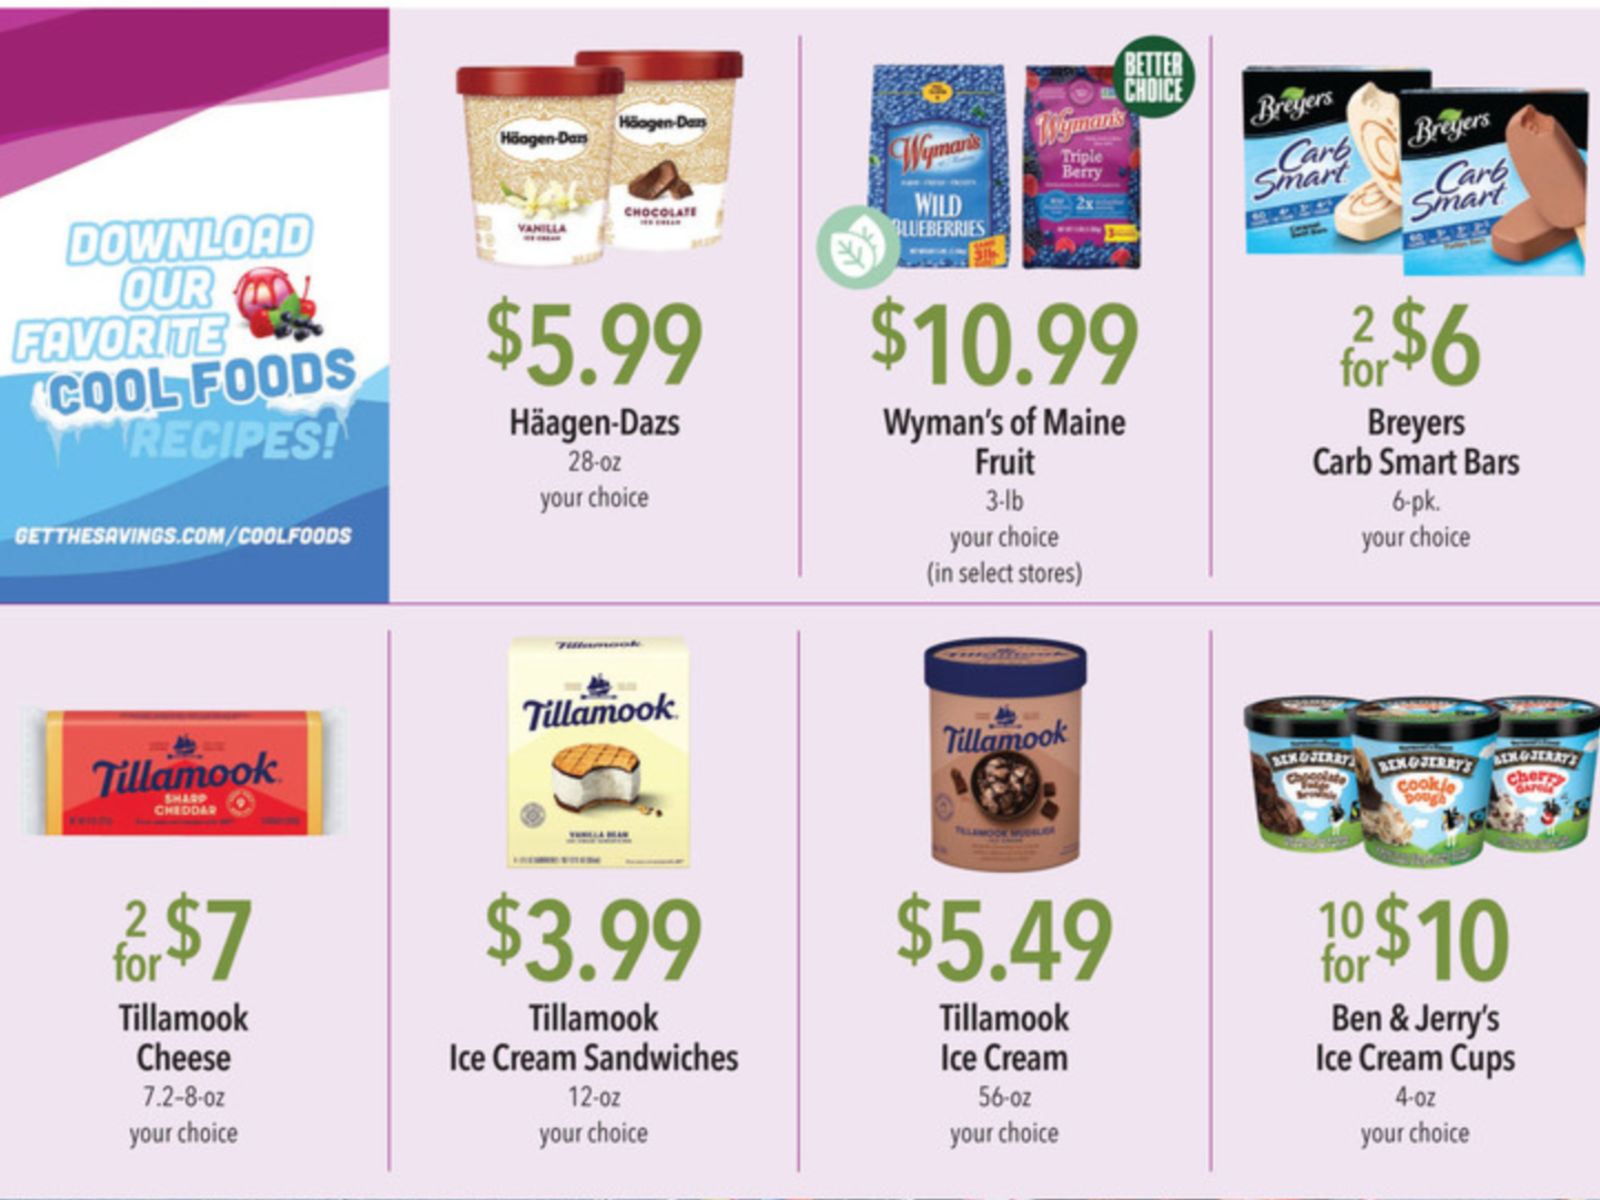 Stock Your Freezer And Save Big At Publix During March Frozen Food Month – Get Cool Foods For Families!